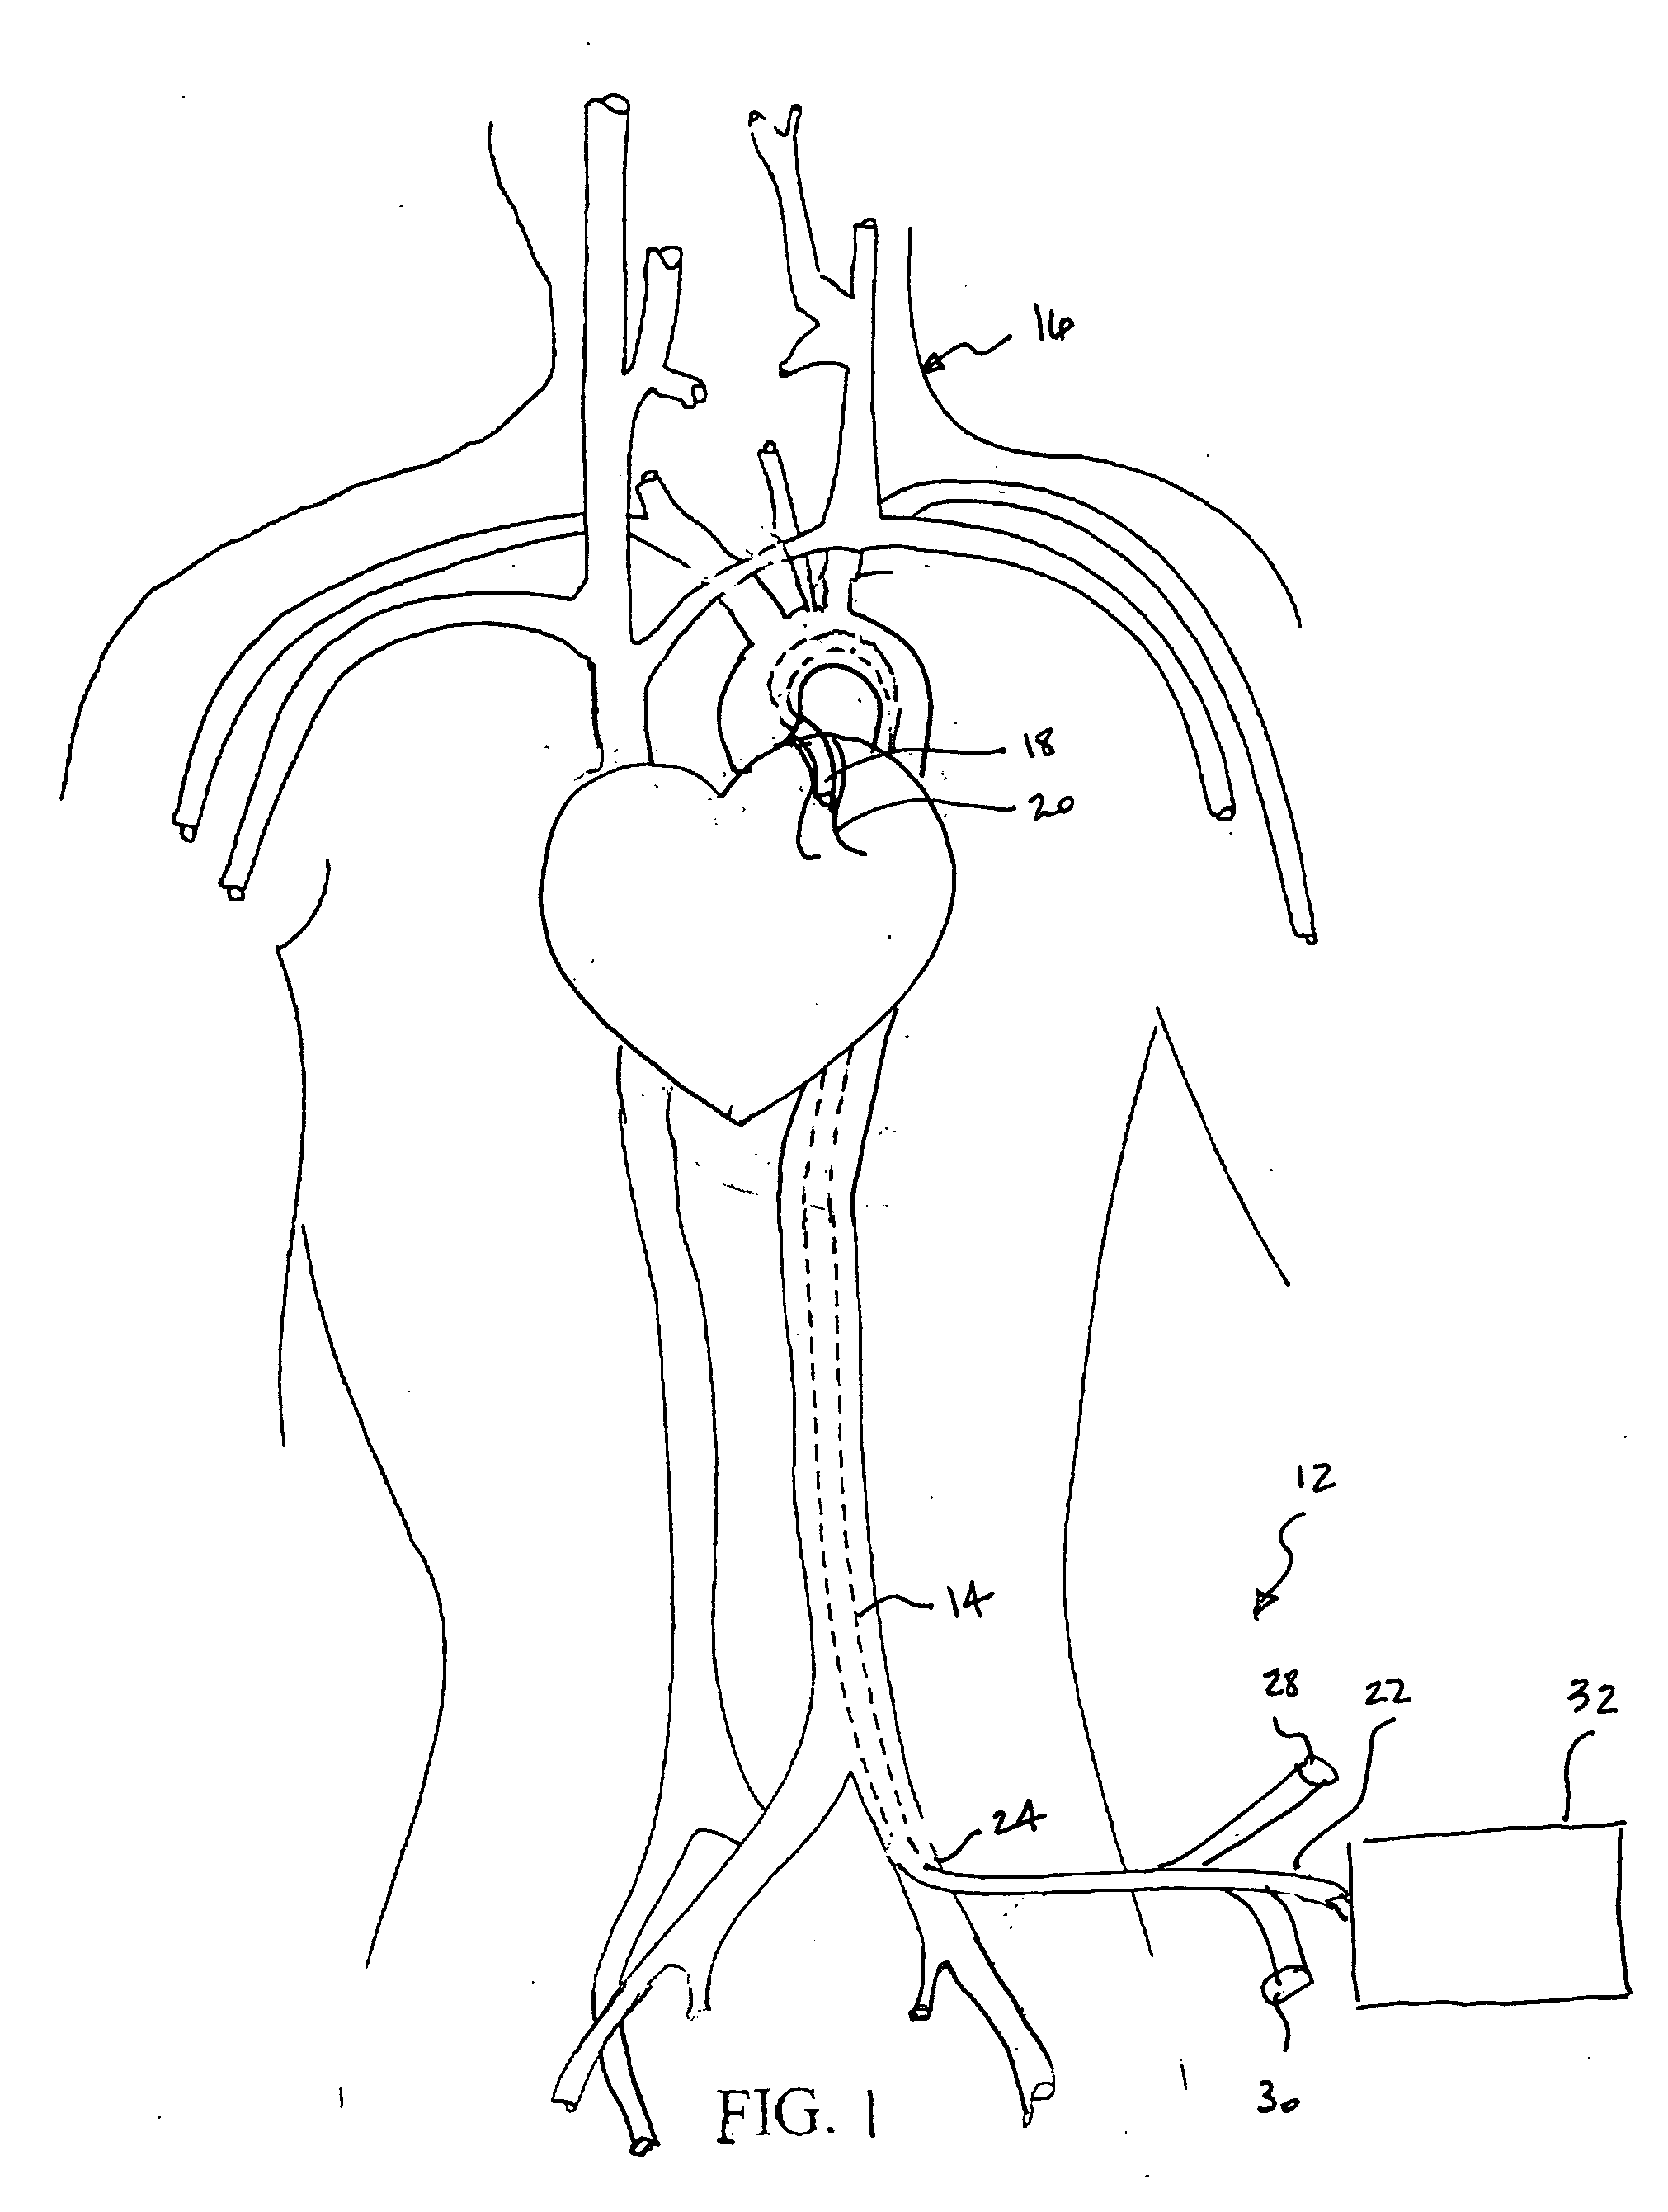 Method and apparatus for treating acute myocardial infarction with selective hypothermic perfusion